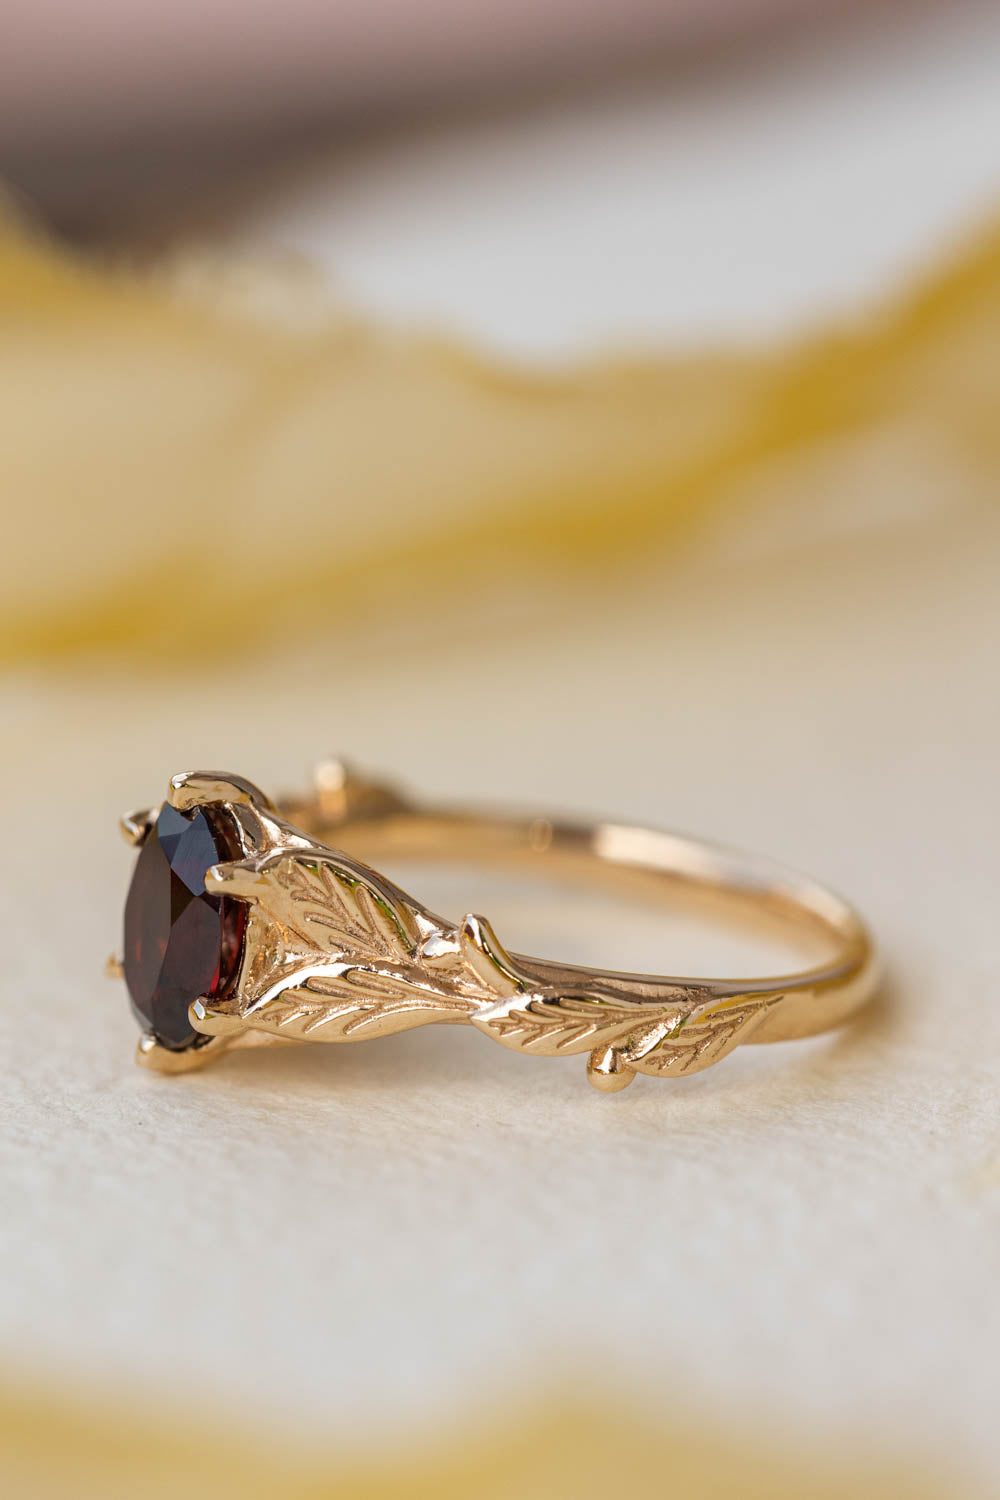 READY TO SHIP: Freesia ring in 14K yellow gold, natural garnet 8x6 mm oval cut, RING SIZE - 7 US - Eden Garden Jewelry™